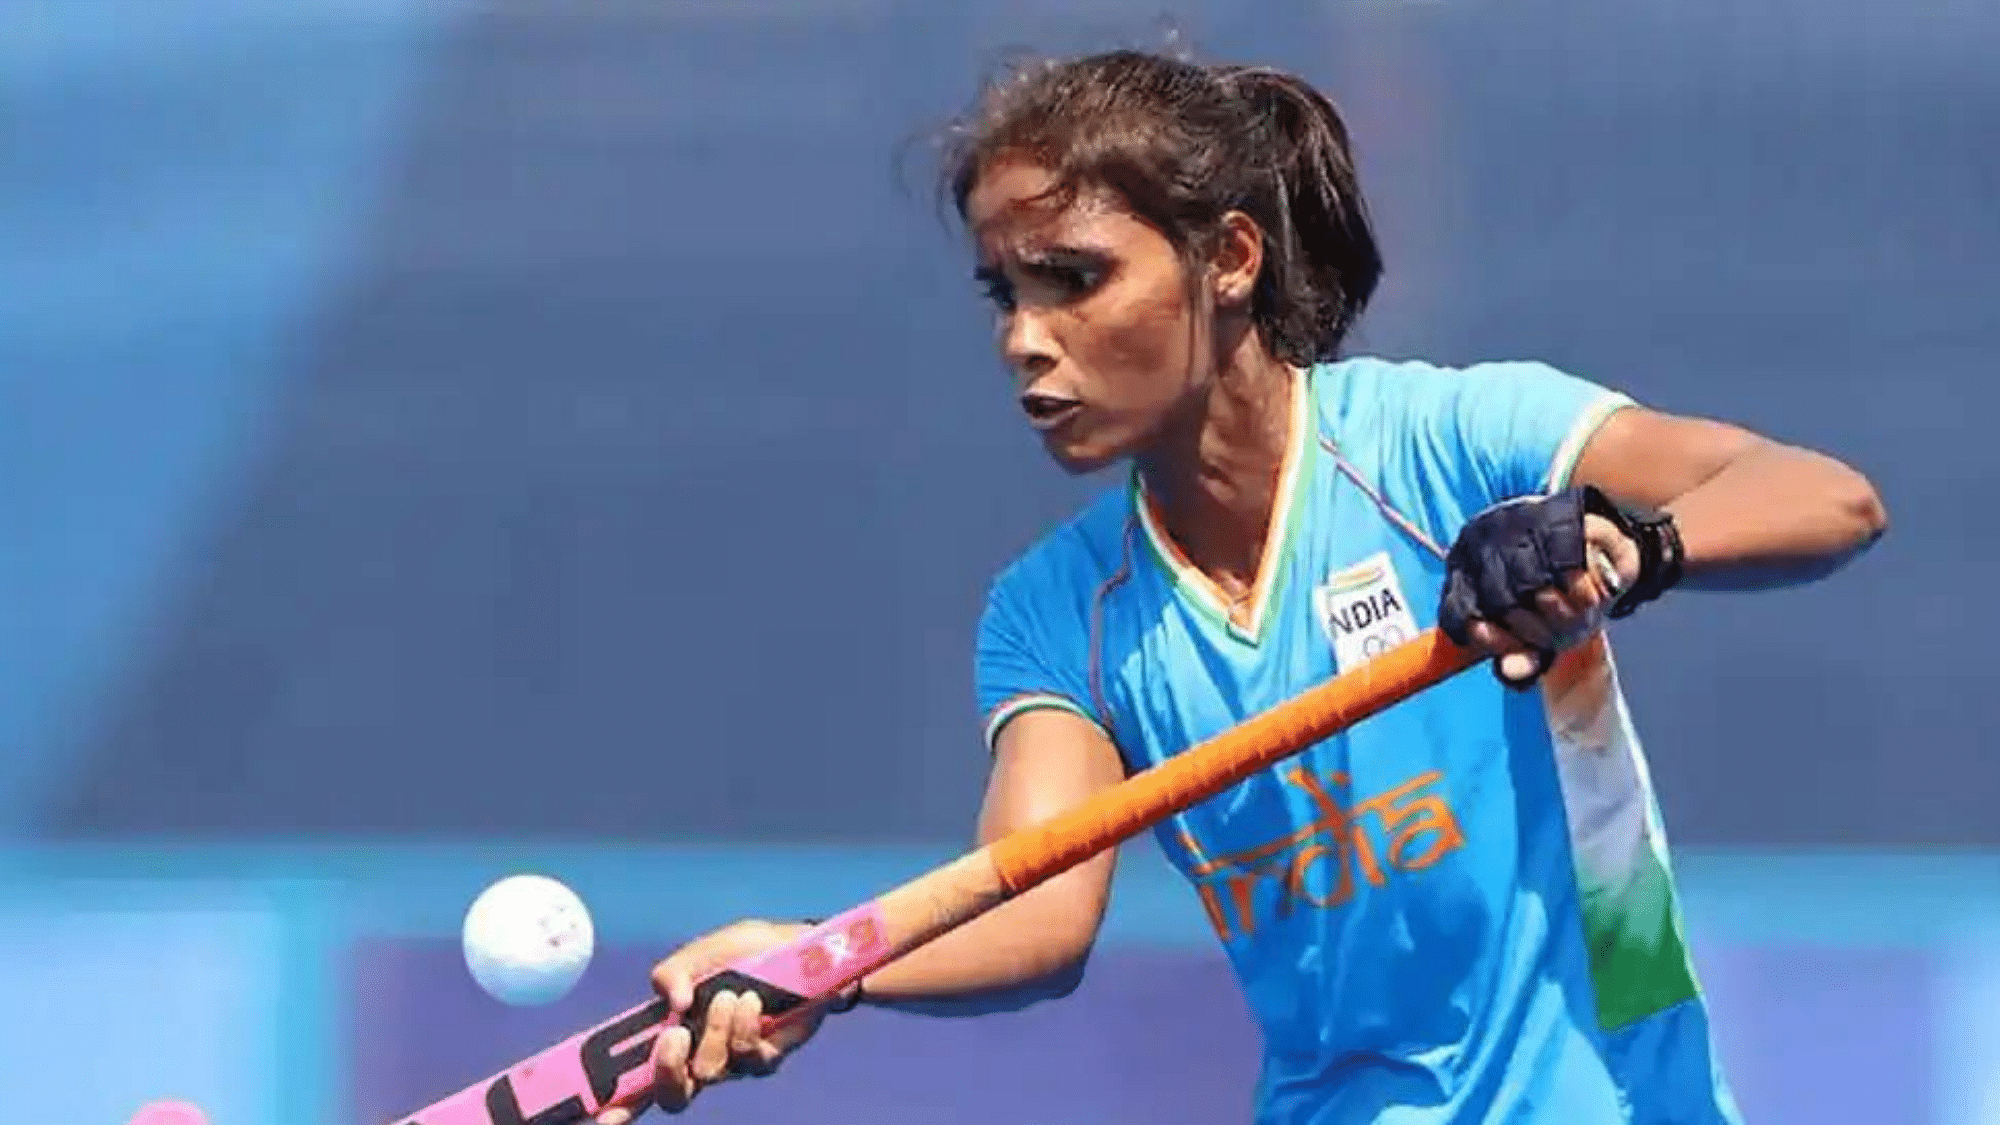 <div class="paragraphs"><p>Forward in India's international hockey team for the Tokyo Olympics Vandana Katariya spoke to <em>The Indian Express </em>and said that she hopes to end the usage of casteist slurs and wished that people back the team.</p></div>